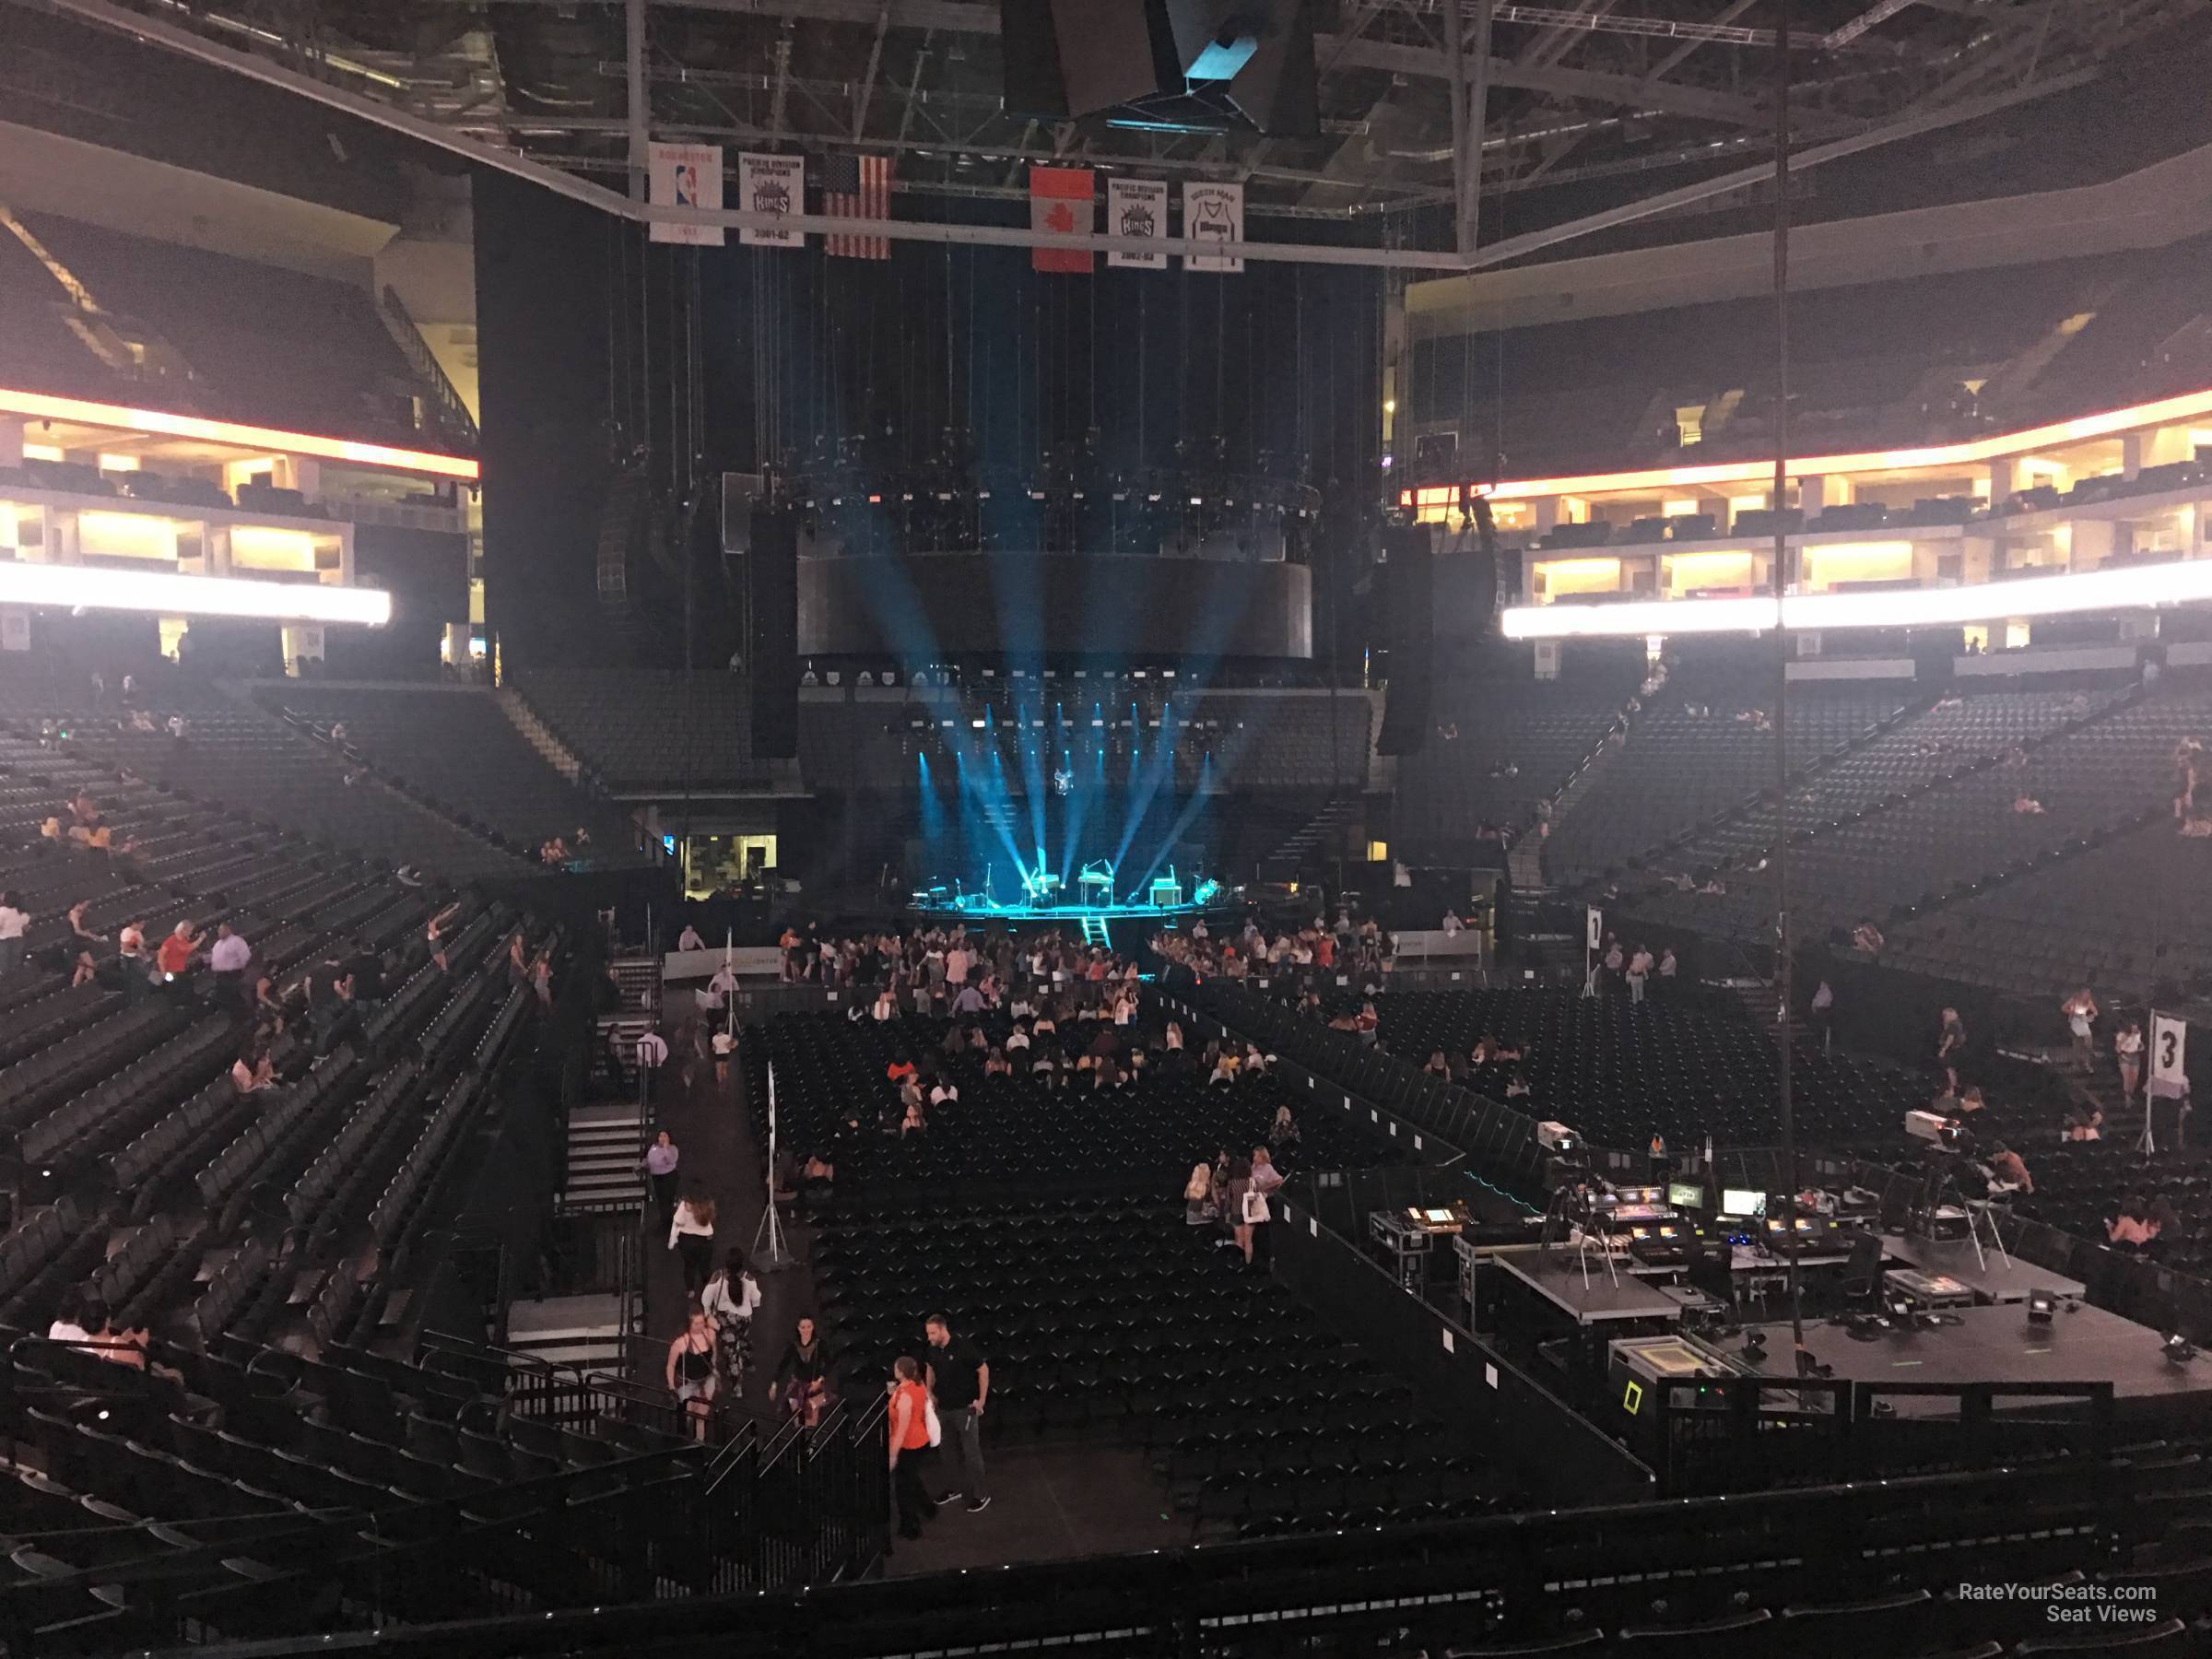 section 115, row m seat view  for concert - golden 1 center